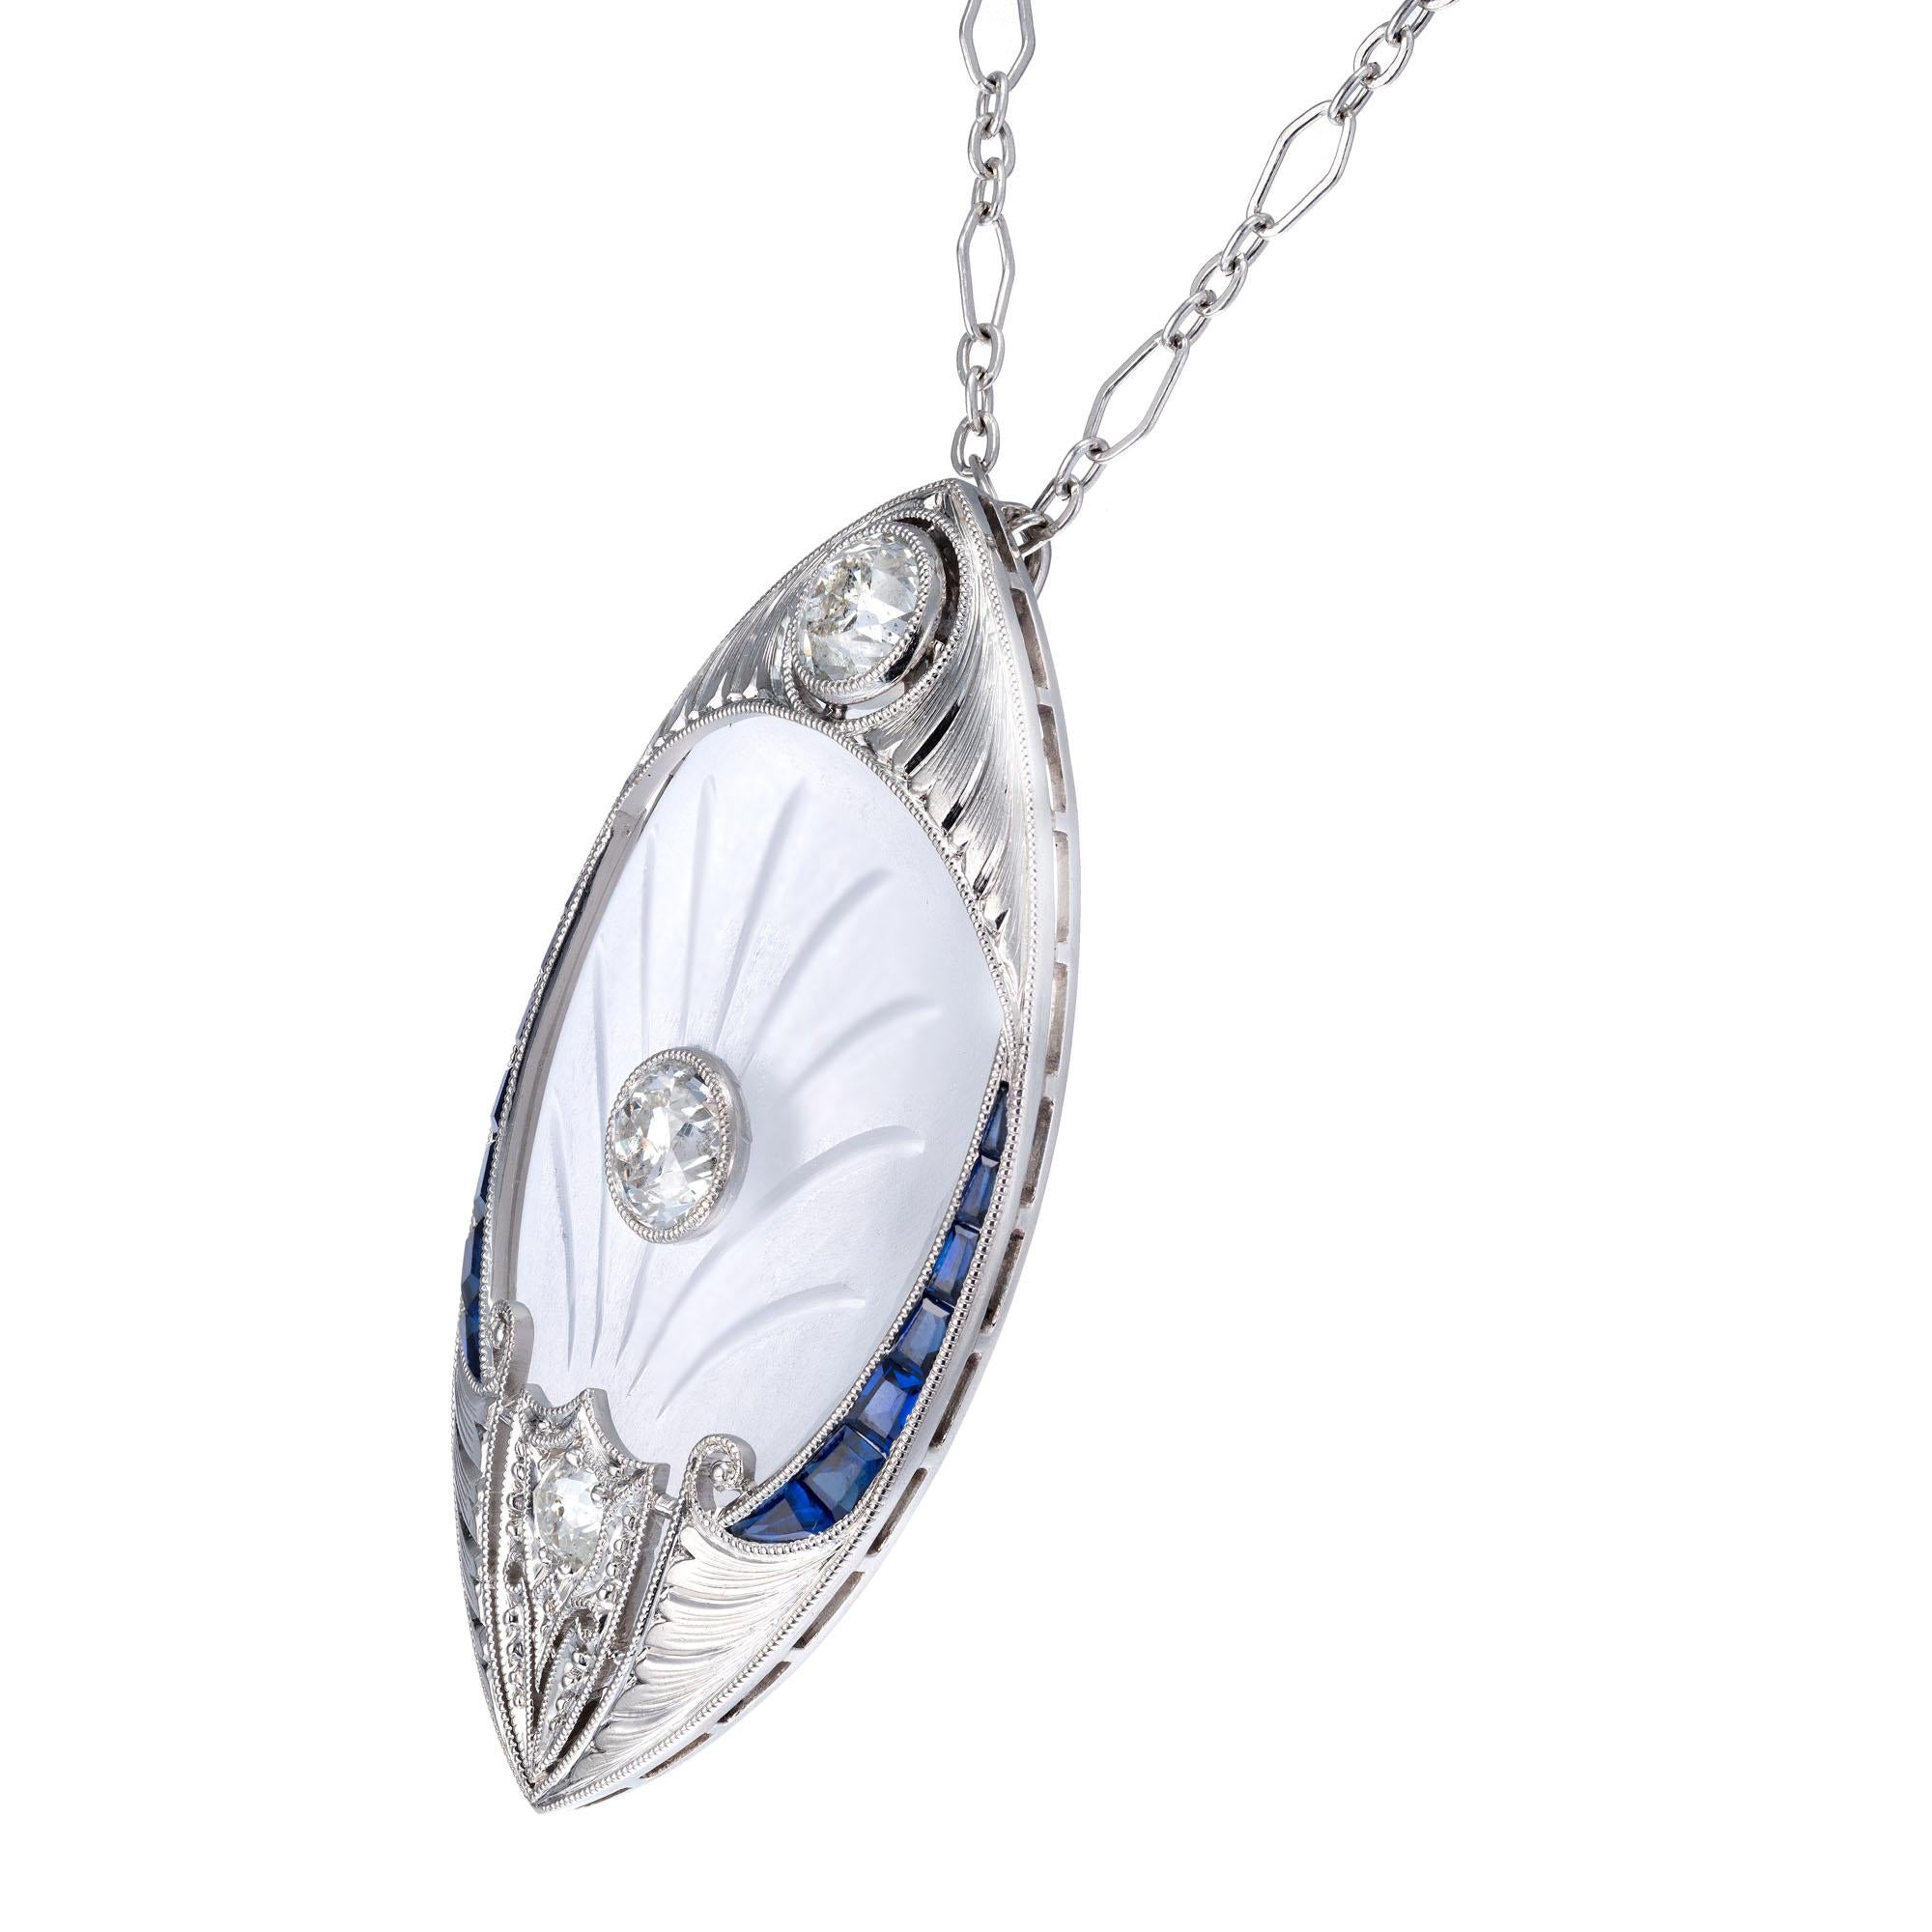 Art Deco platinum old mine cut diamond angel skin quartz pendant necklace accented with graduated sapphire baguettes. Handmade platinum chain with later catch. 17.5 inches. 

3 old mine cut diamonds, I SI-I approx. 1.25 total carat weight
14 step